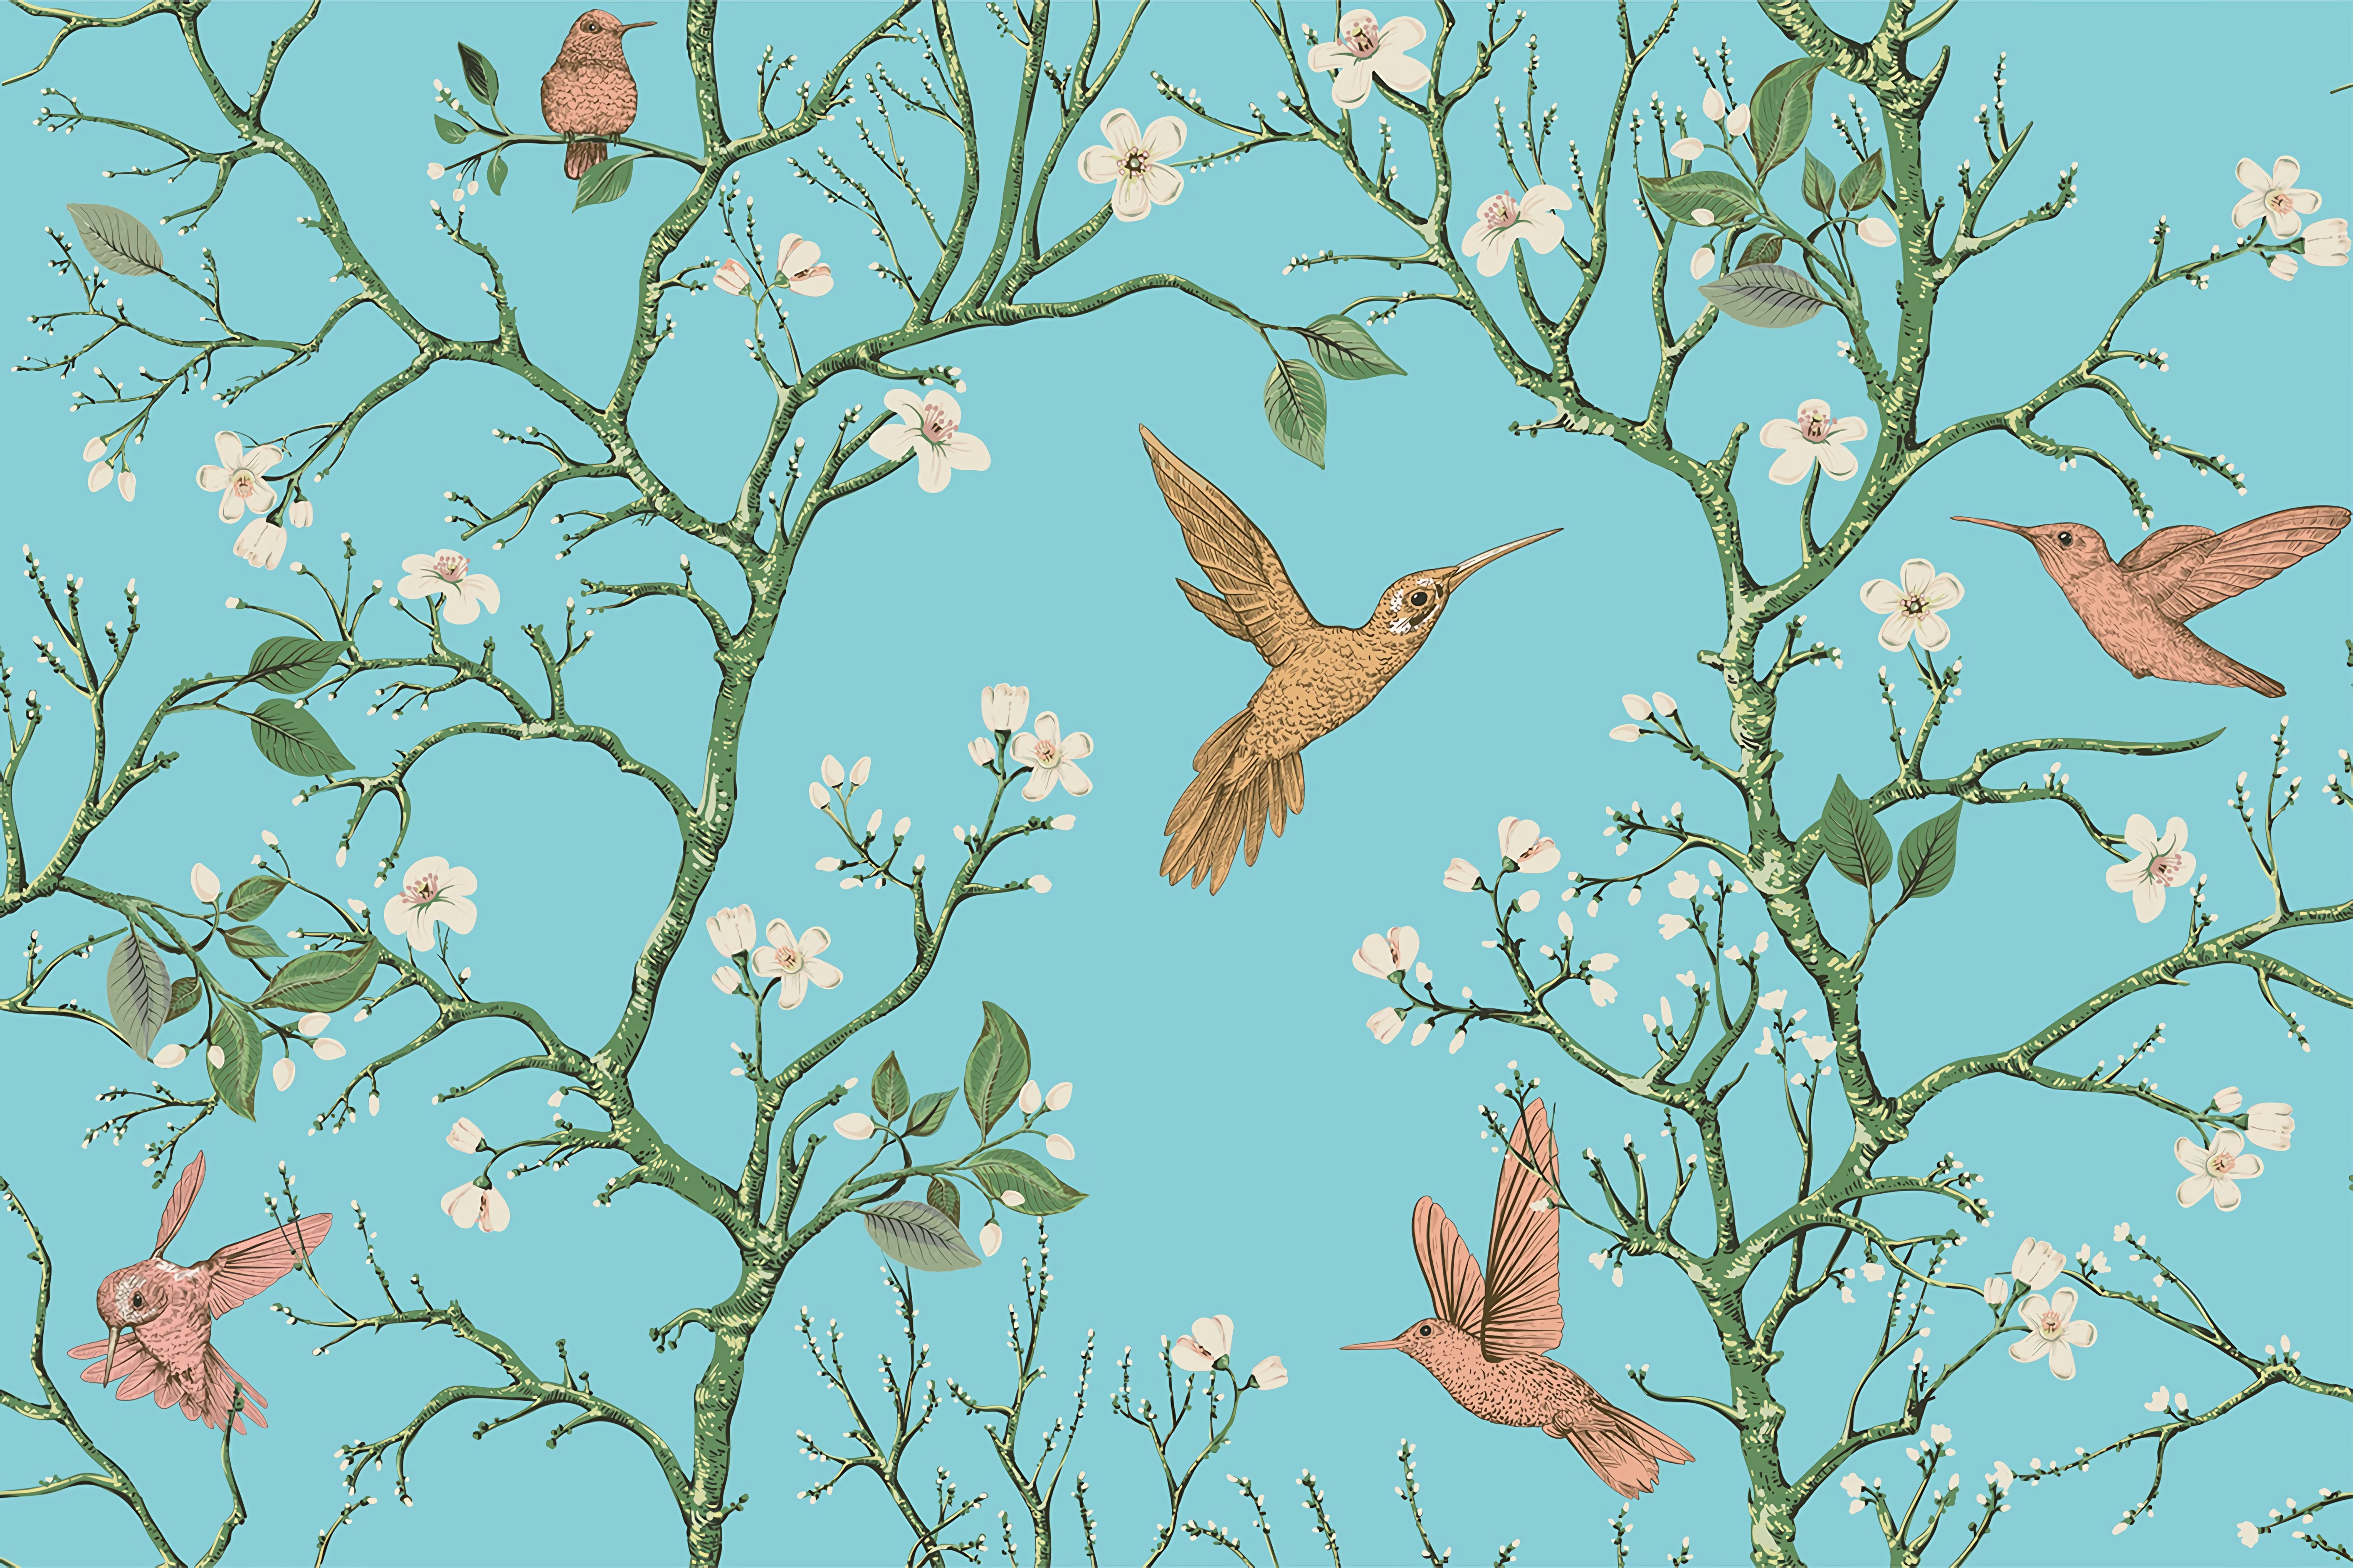 pattern, spring, birds, textures, flowers, texture, branches